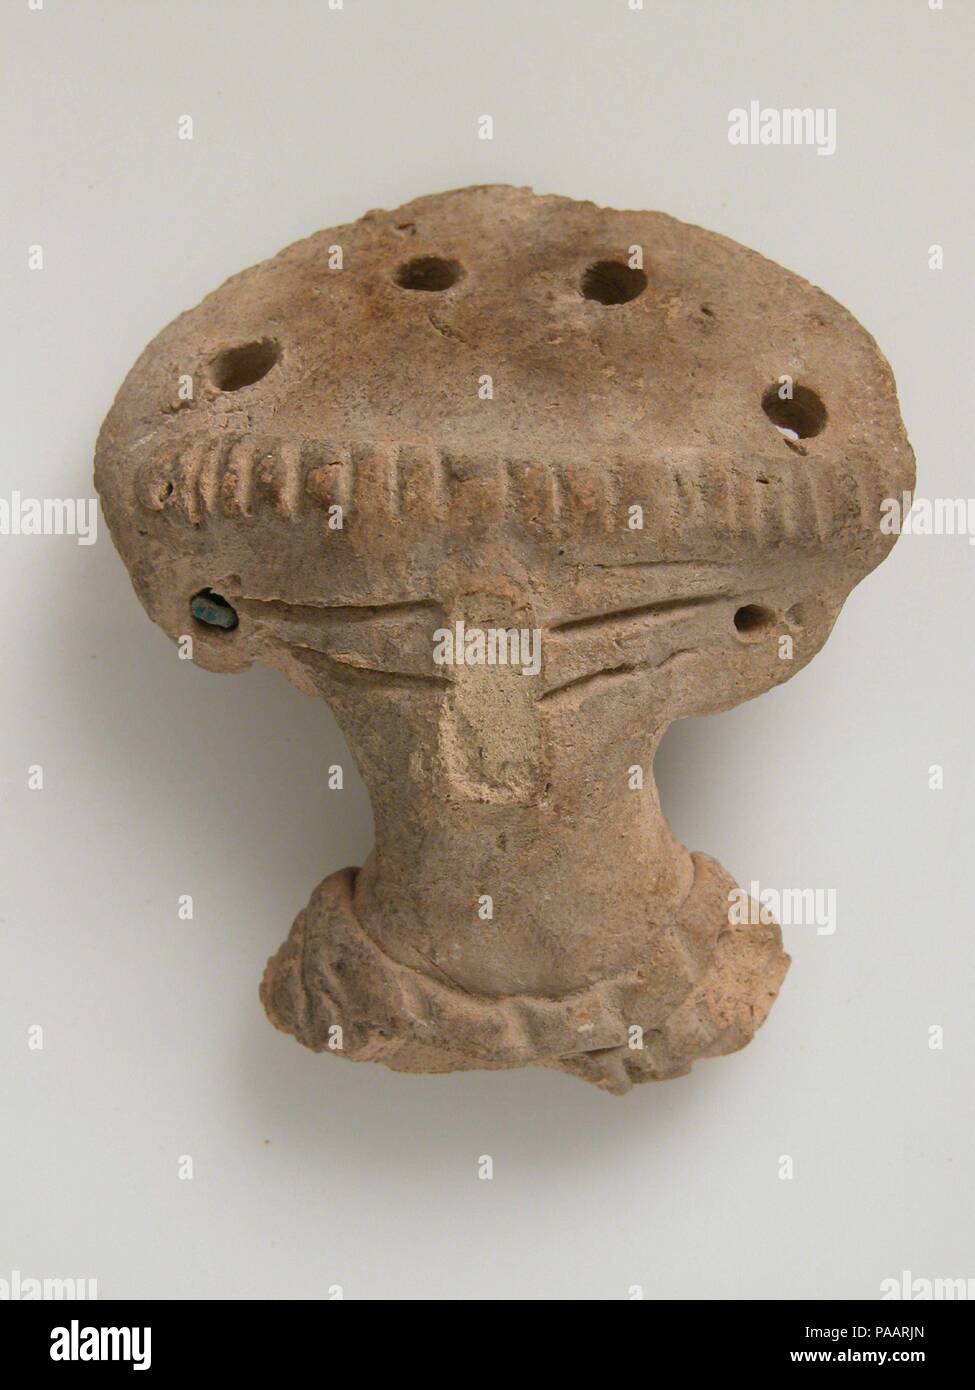 Head. Culture: Coptic. Dimensions: Overall: 2 x 1 3/4 x 13/16 in. (5.1 x 4.5 x 2.1 cm). Date: 4th-7th century. Museum: Metropolitan Museum of Art, New York, USA. Stock Photo